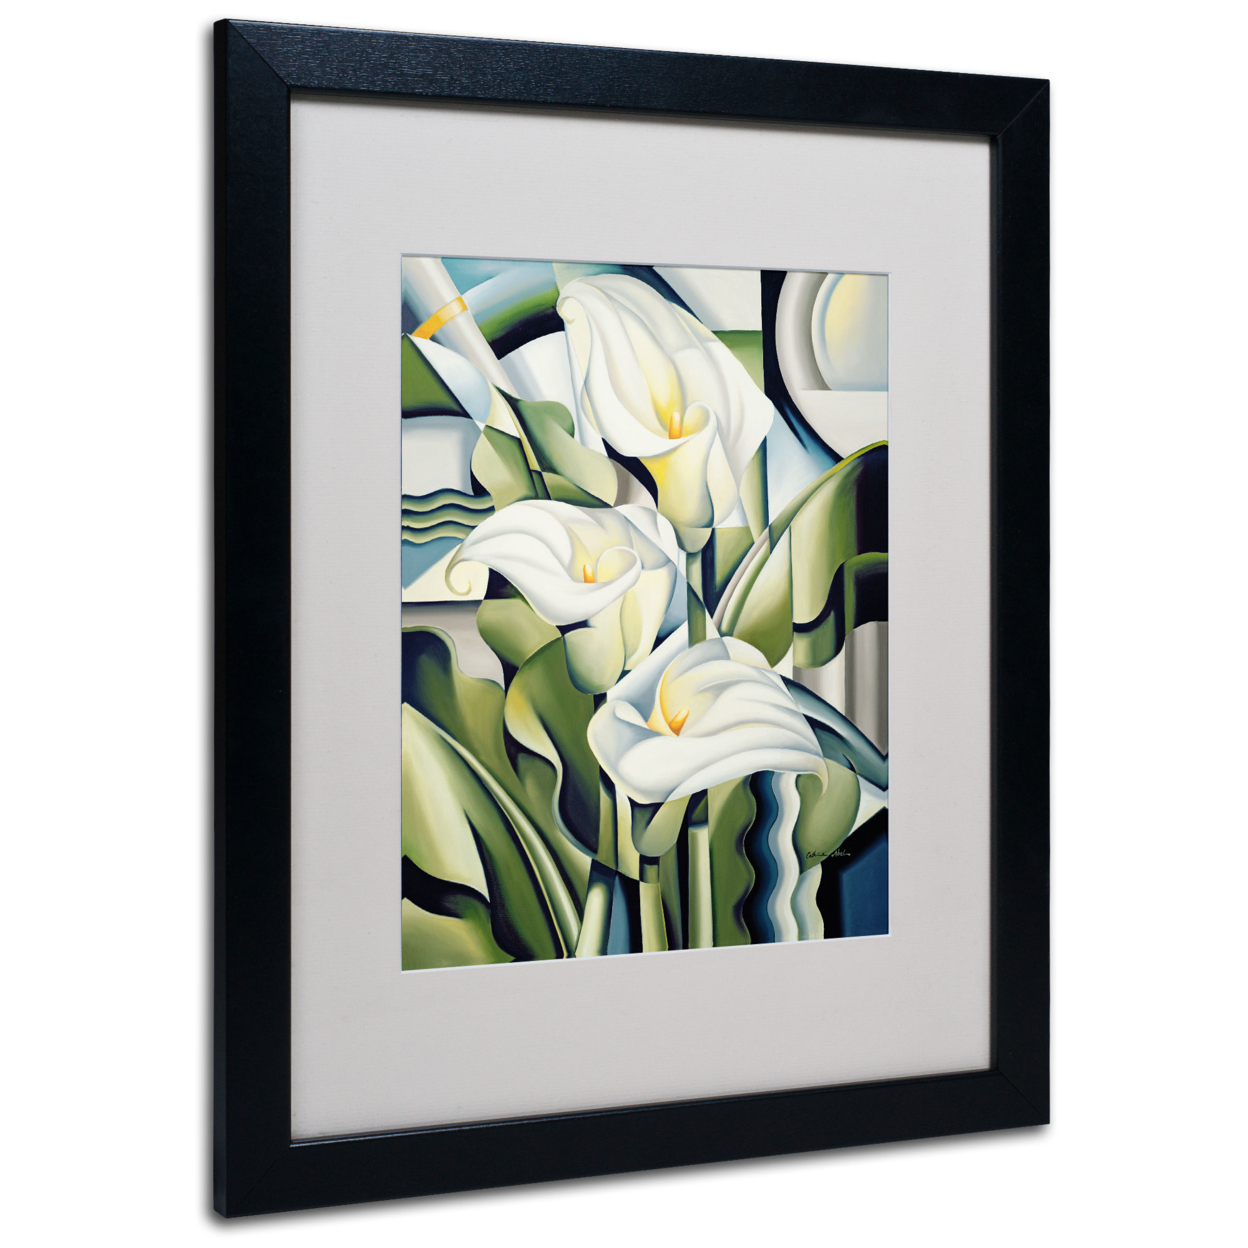 Catherine Abel 'Cubist Lilies' 2002 Black Wooden Framed Art 18 X 22 Inches